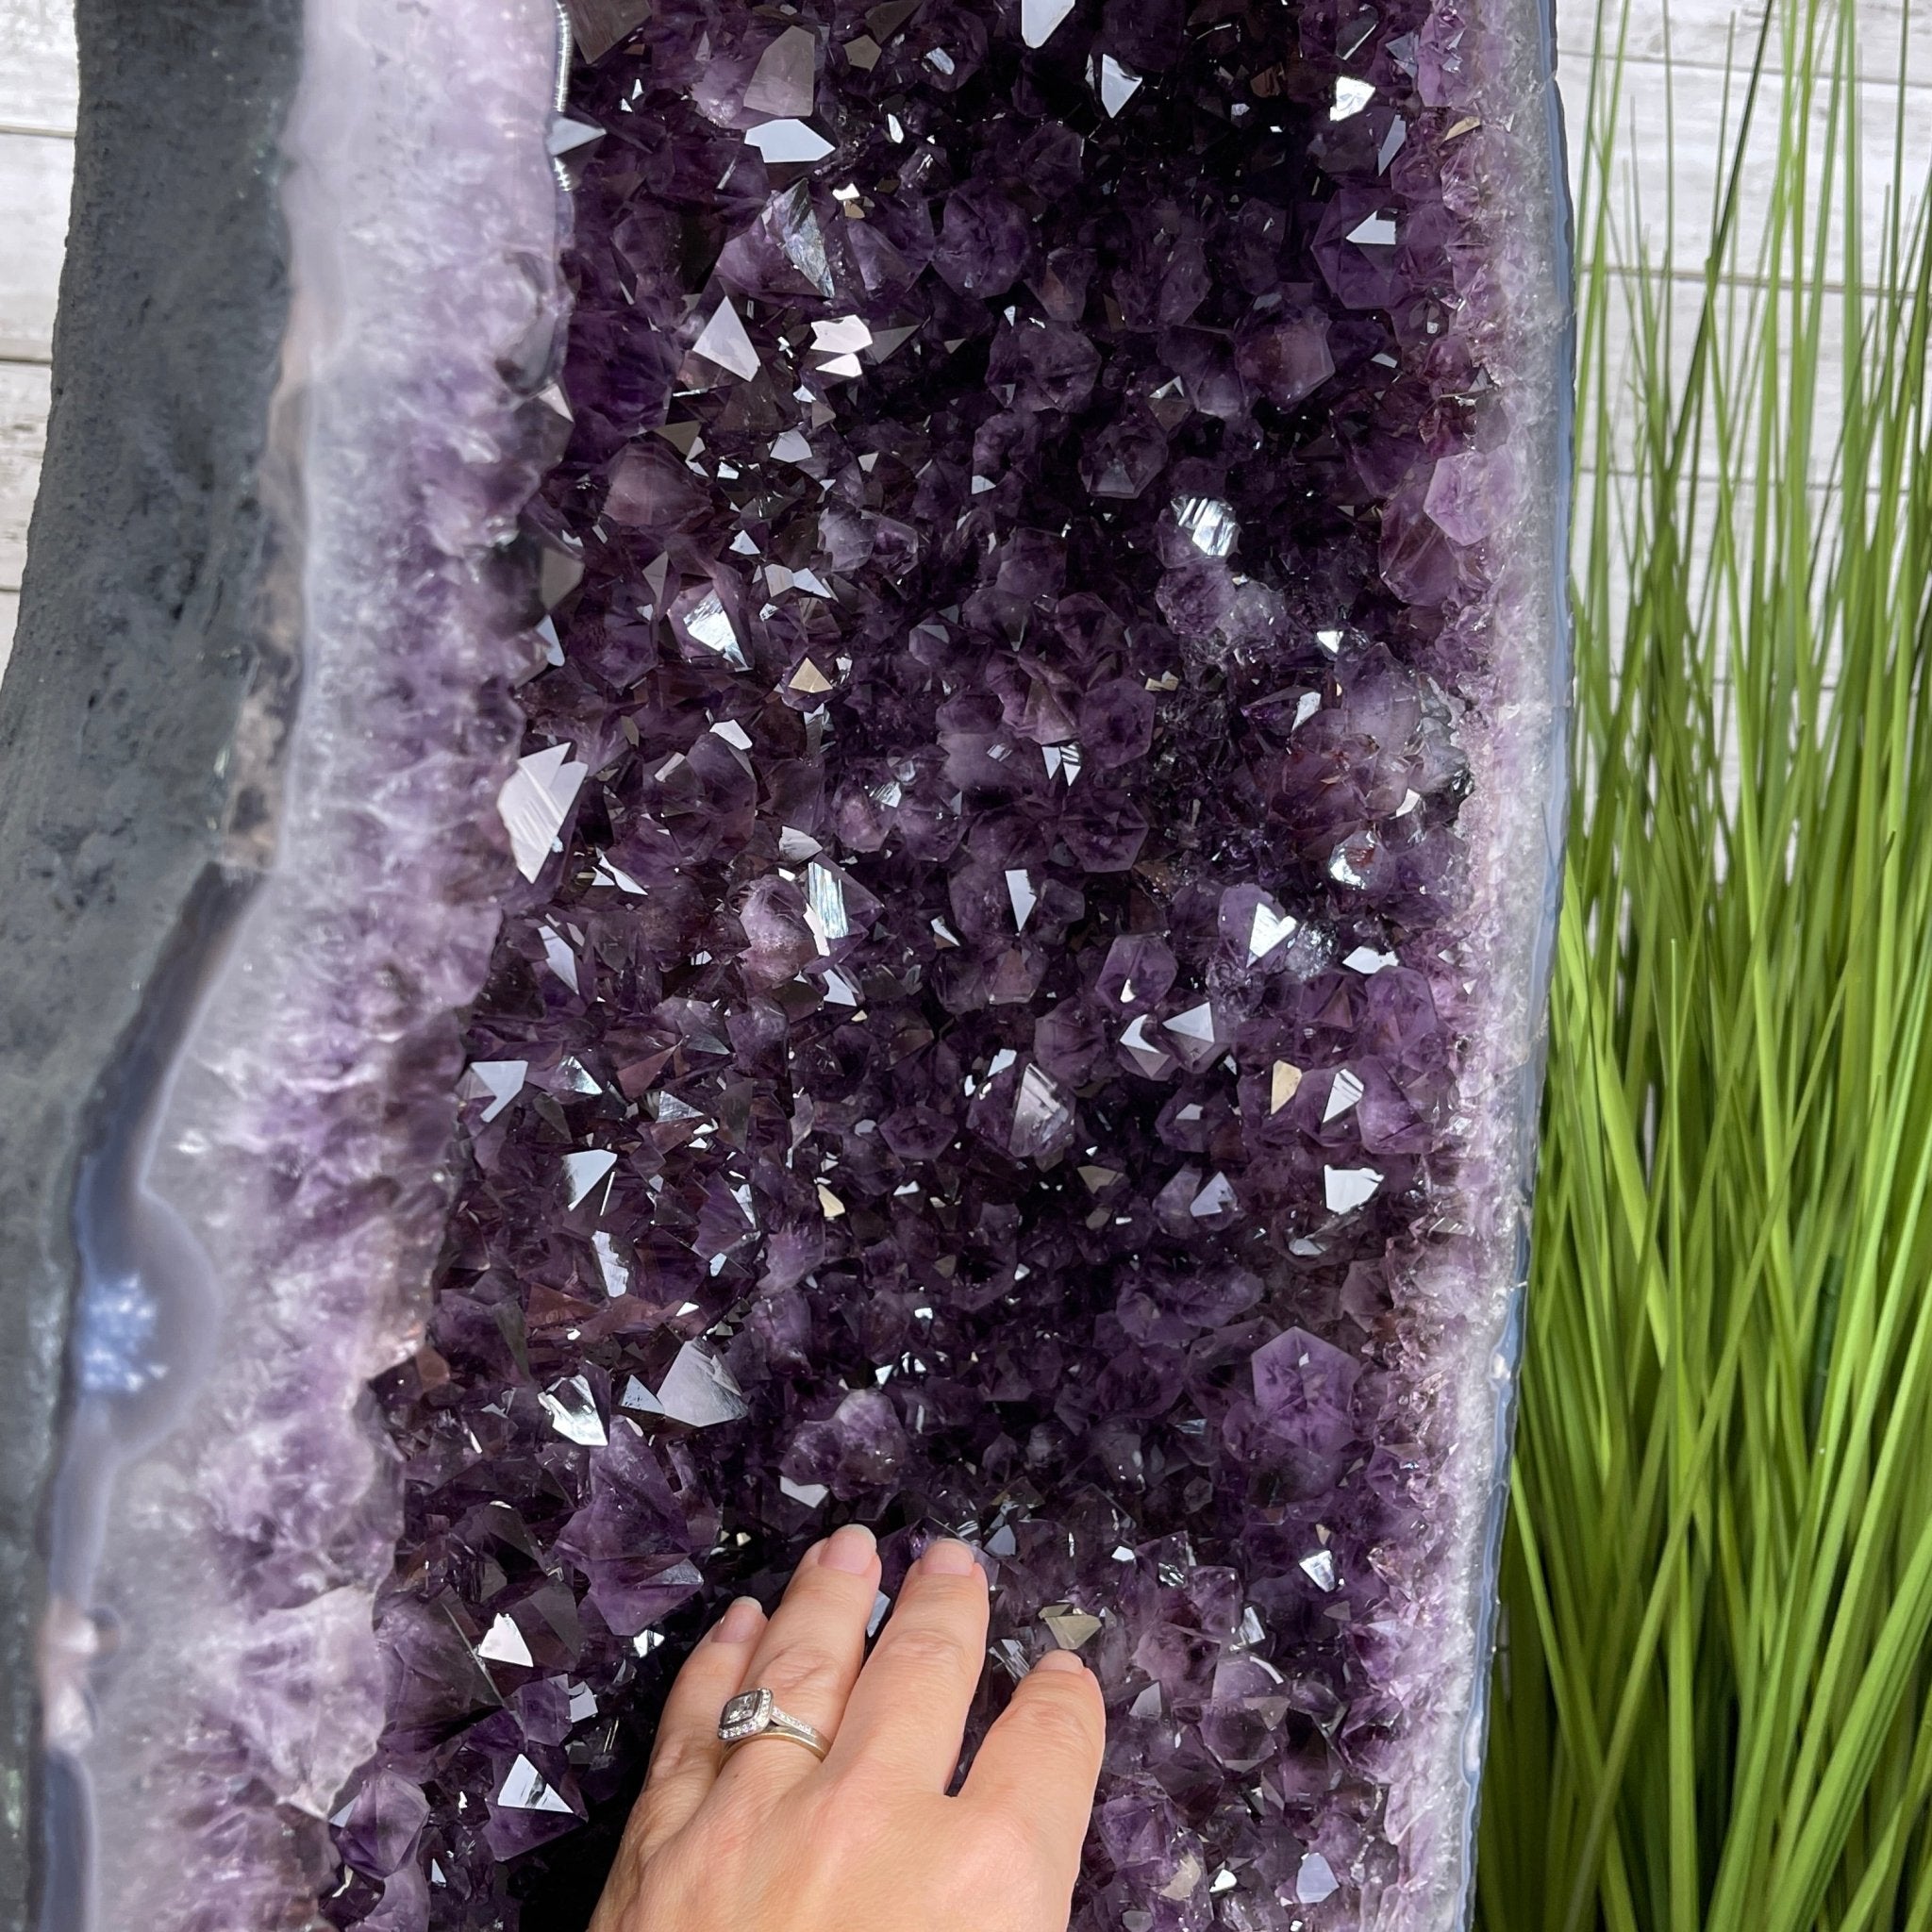 Super Quality Brazilian Amethyst Cathedral, 23” tall & 122.2 lbs #5601-0652 by Brazil Gems - Brazil GemsBrazil GemsSuper Quality Brazilian Amethyst Cathedral, 23” tall & 122.2 lbs #5601-0652 by Brazil GemsCathedrals5601-0652